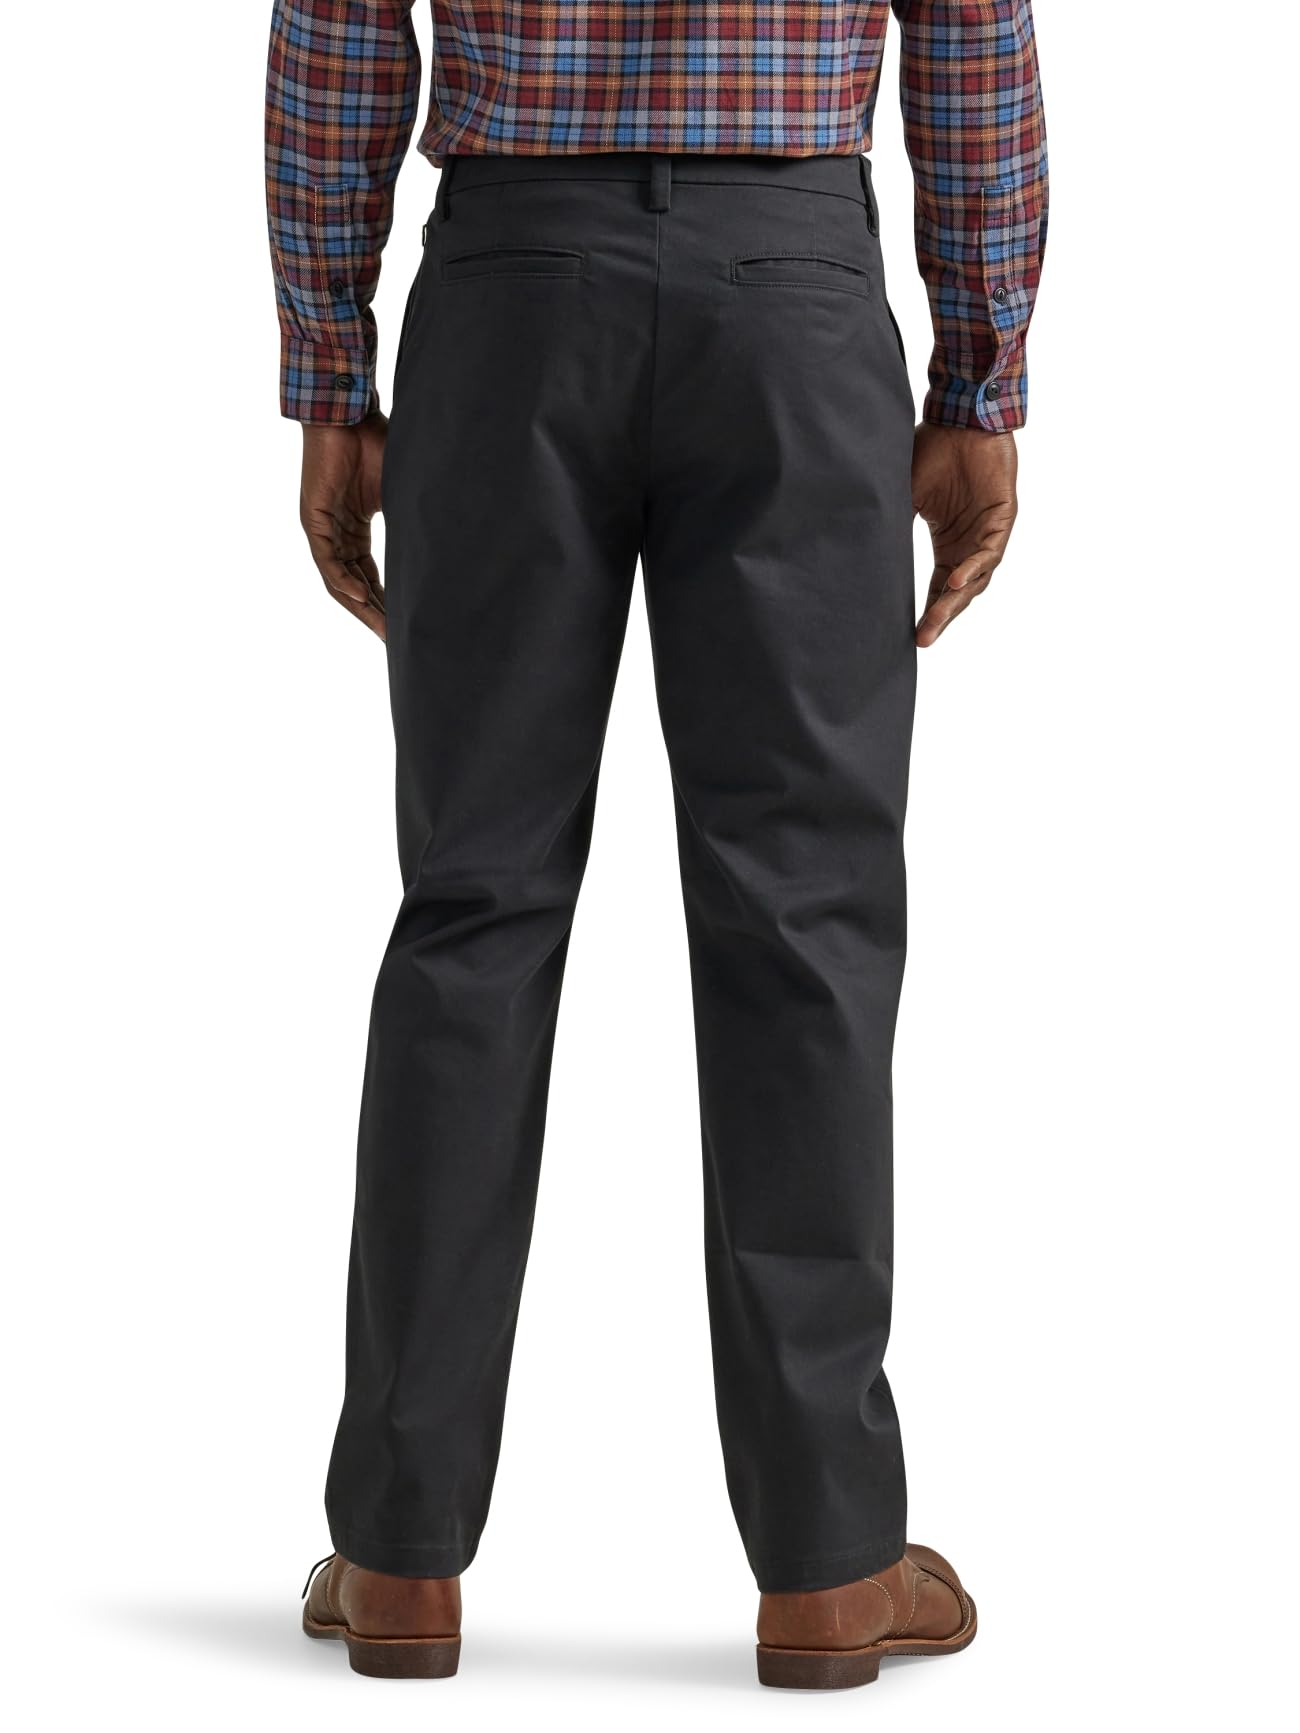 Lee Men's Flat Front Relaxed Straight Pant